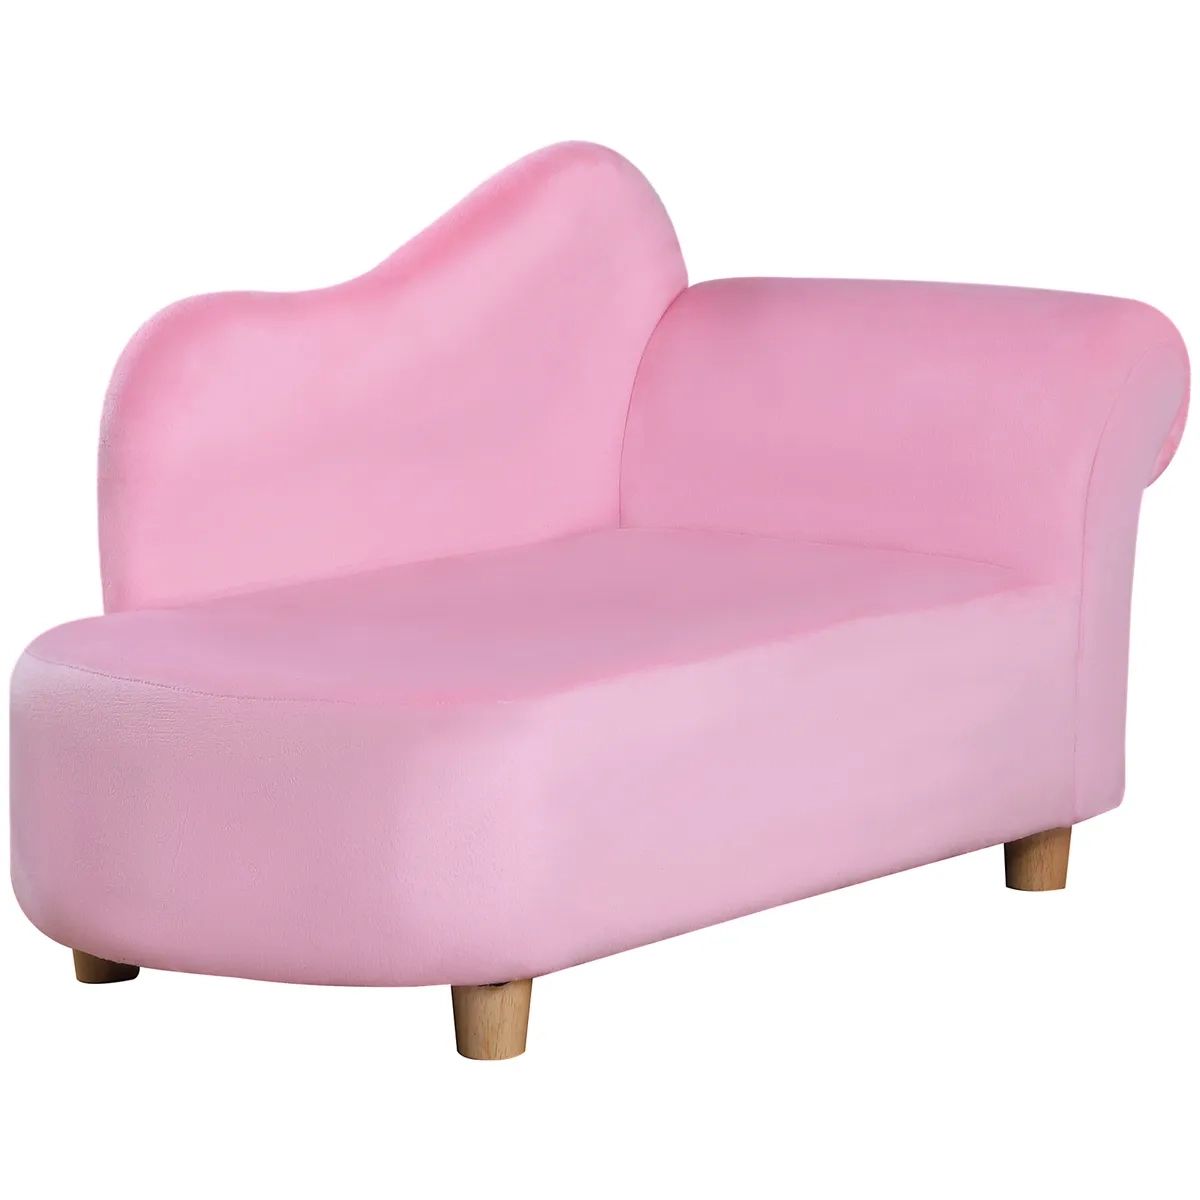 Homcom Kids Sofa Toddler Armchair Lounger Children Sofa Bed Bedroom Chair  Pink | Ebay Within Children&#039;S Sofa Beds (View 8 of 15)